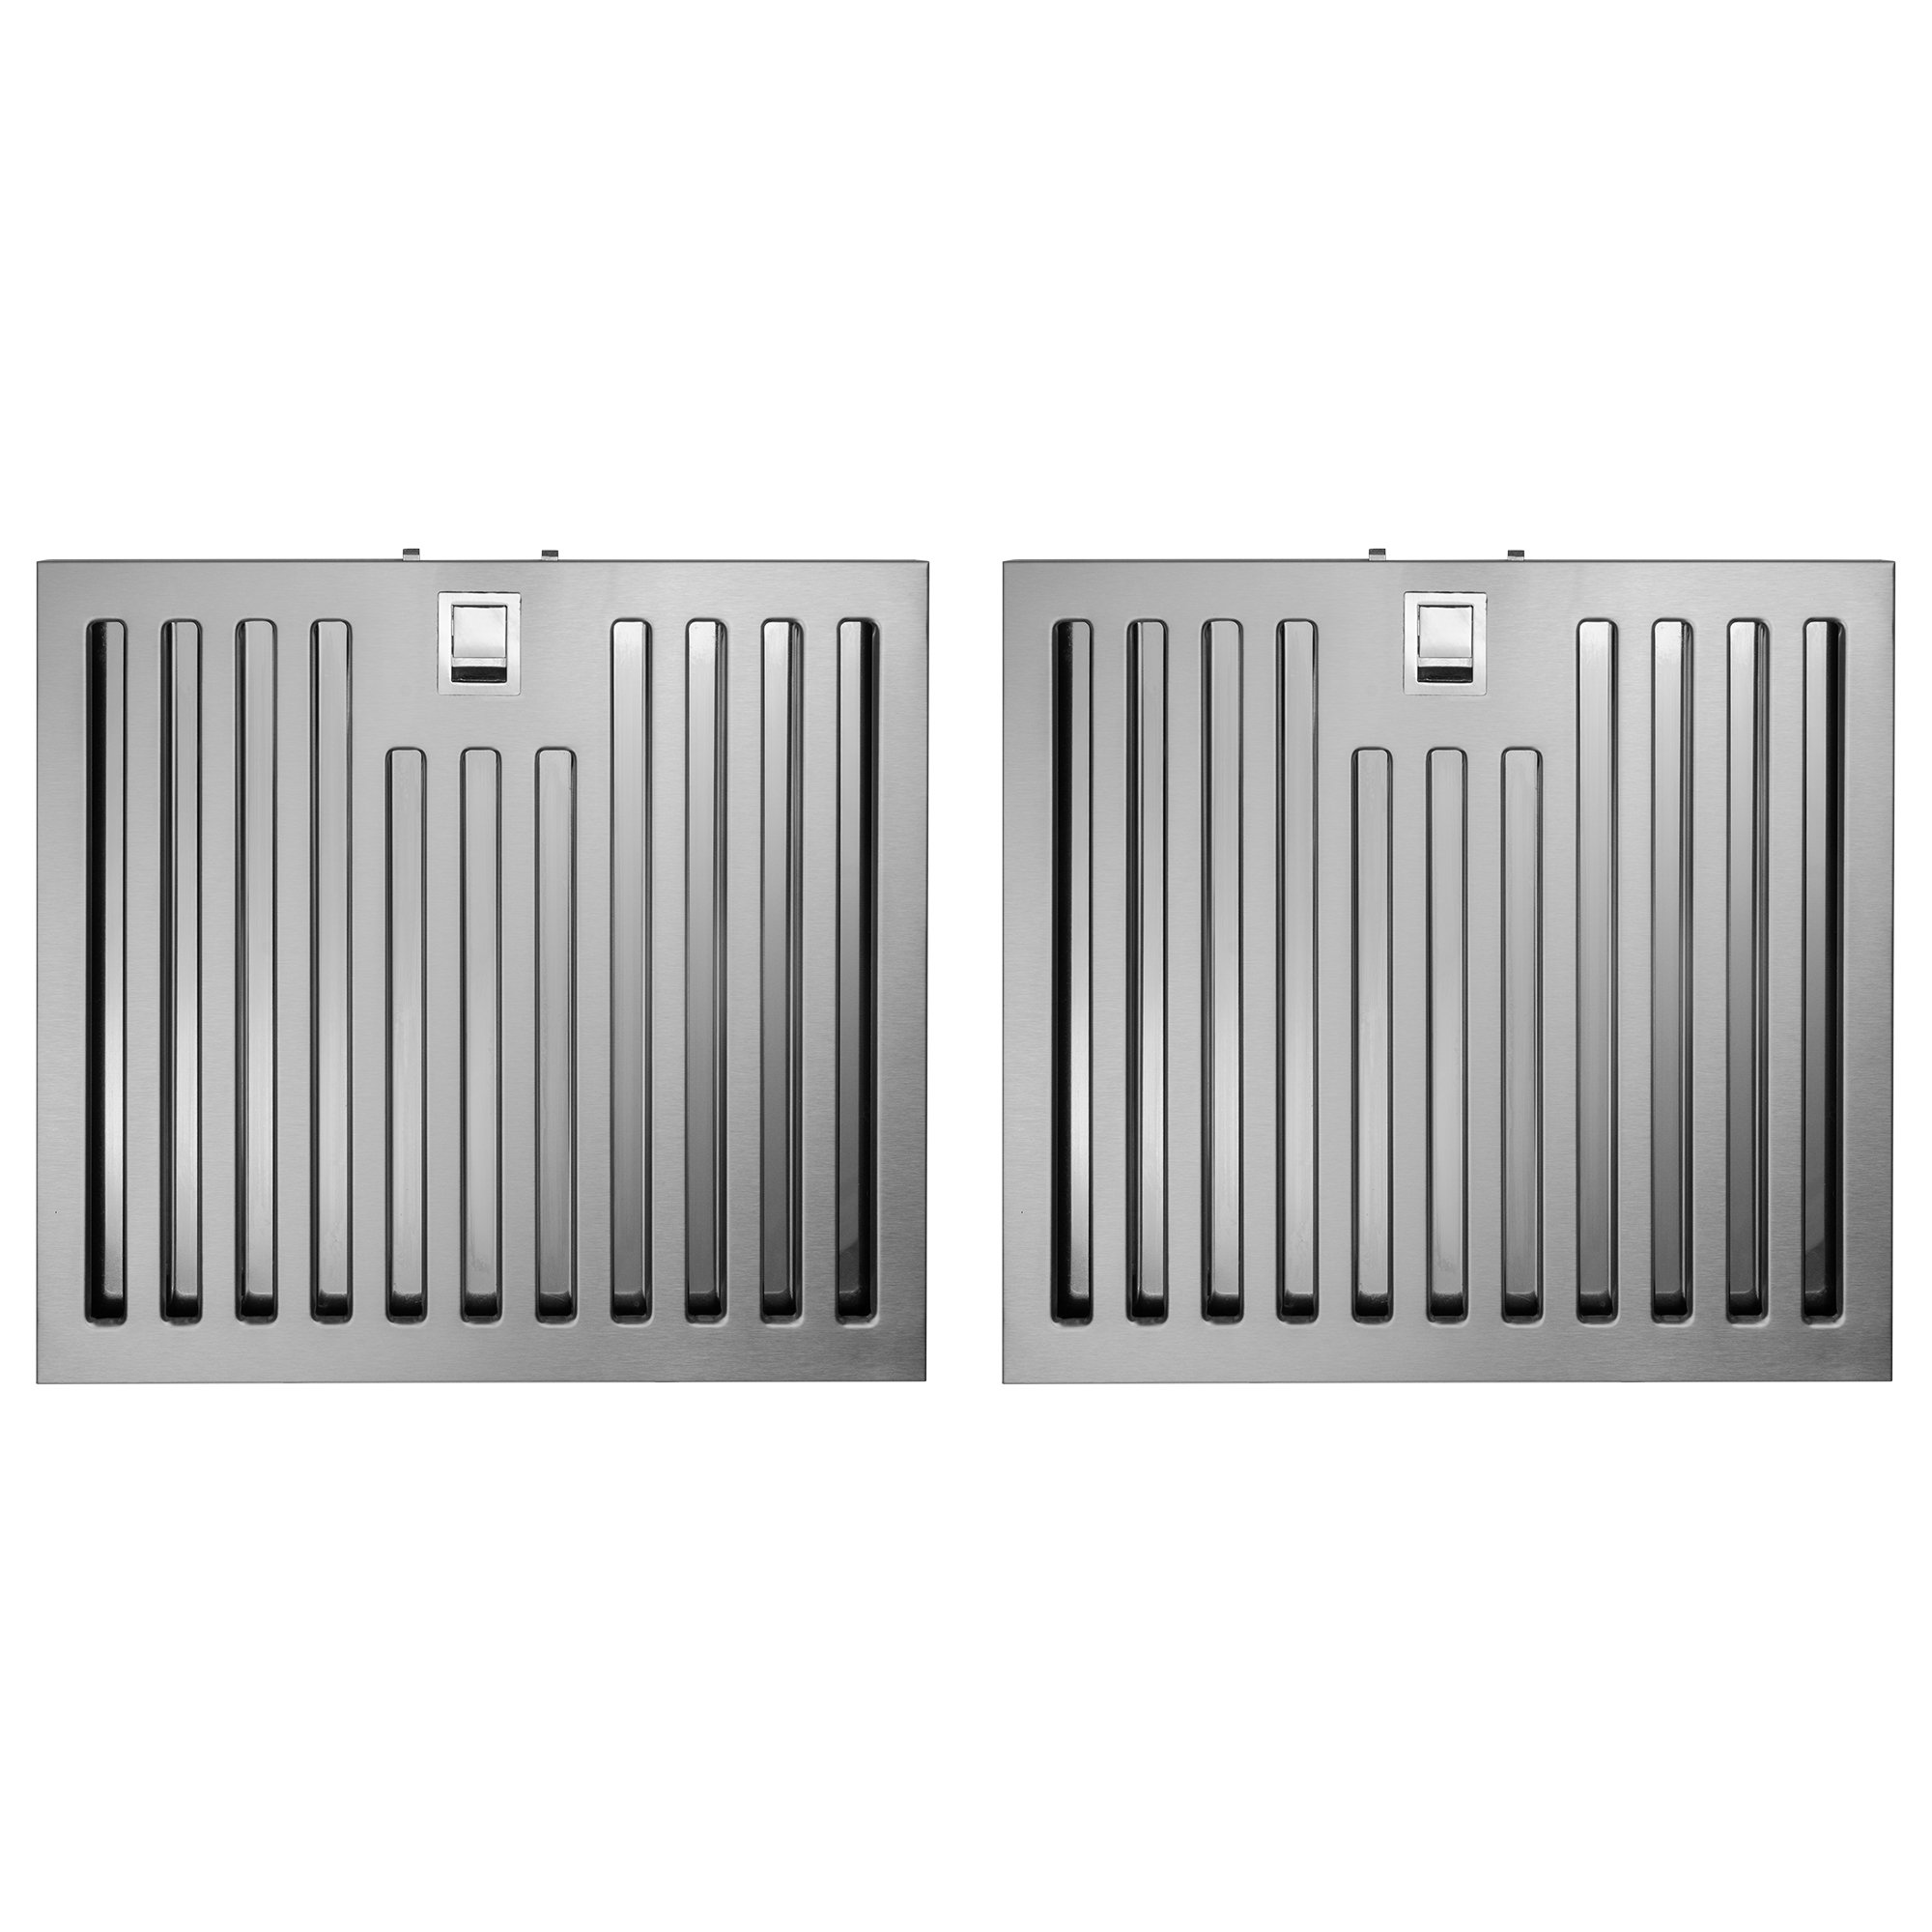 UC30-UMC30-63175-S (RS) (2-Pack)